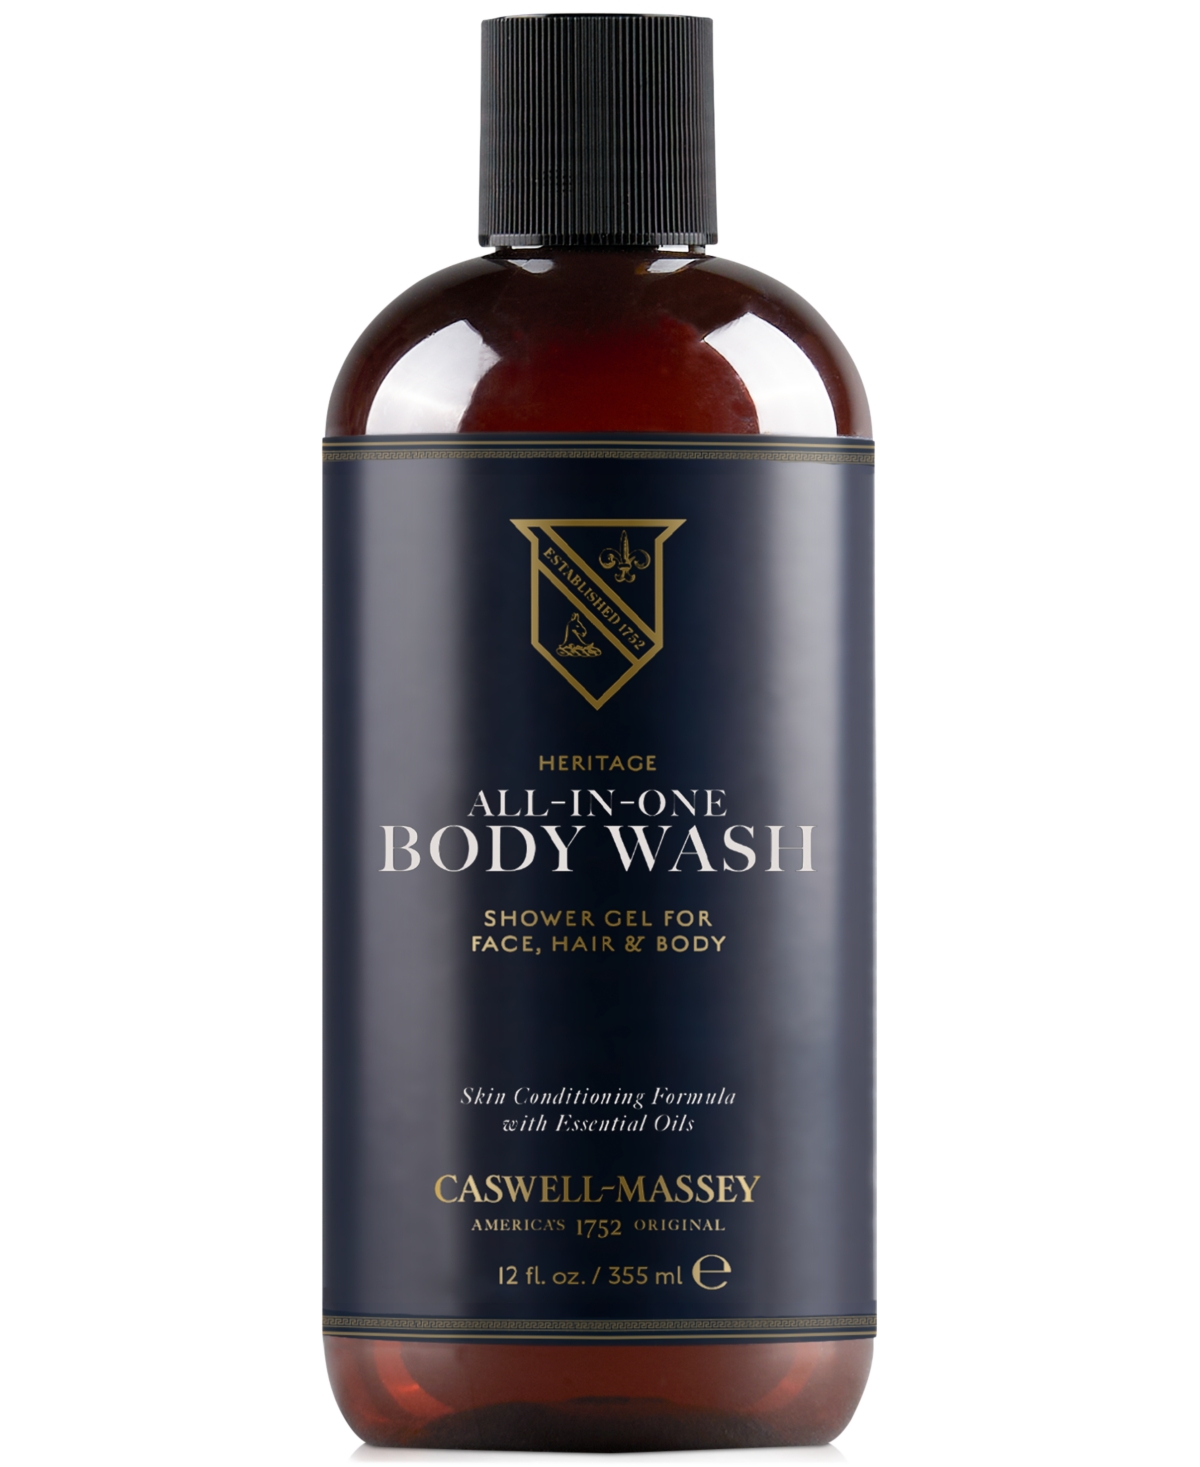 Heritage All-In-One Body Wash, 12 oz.